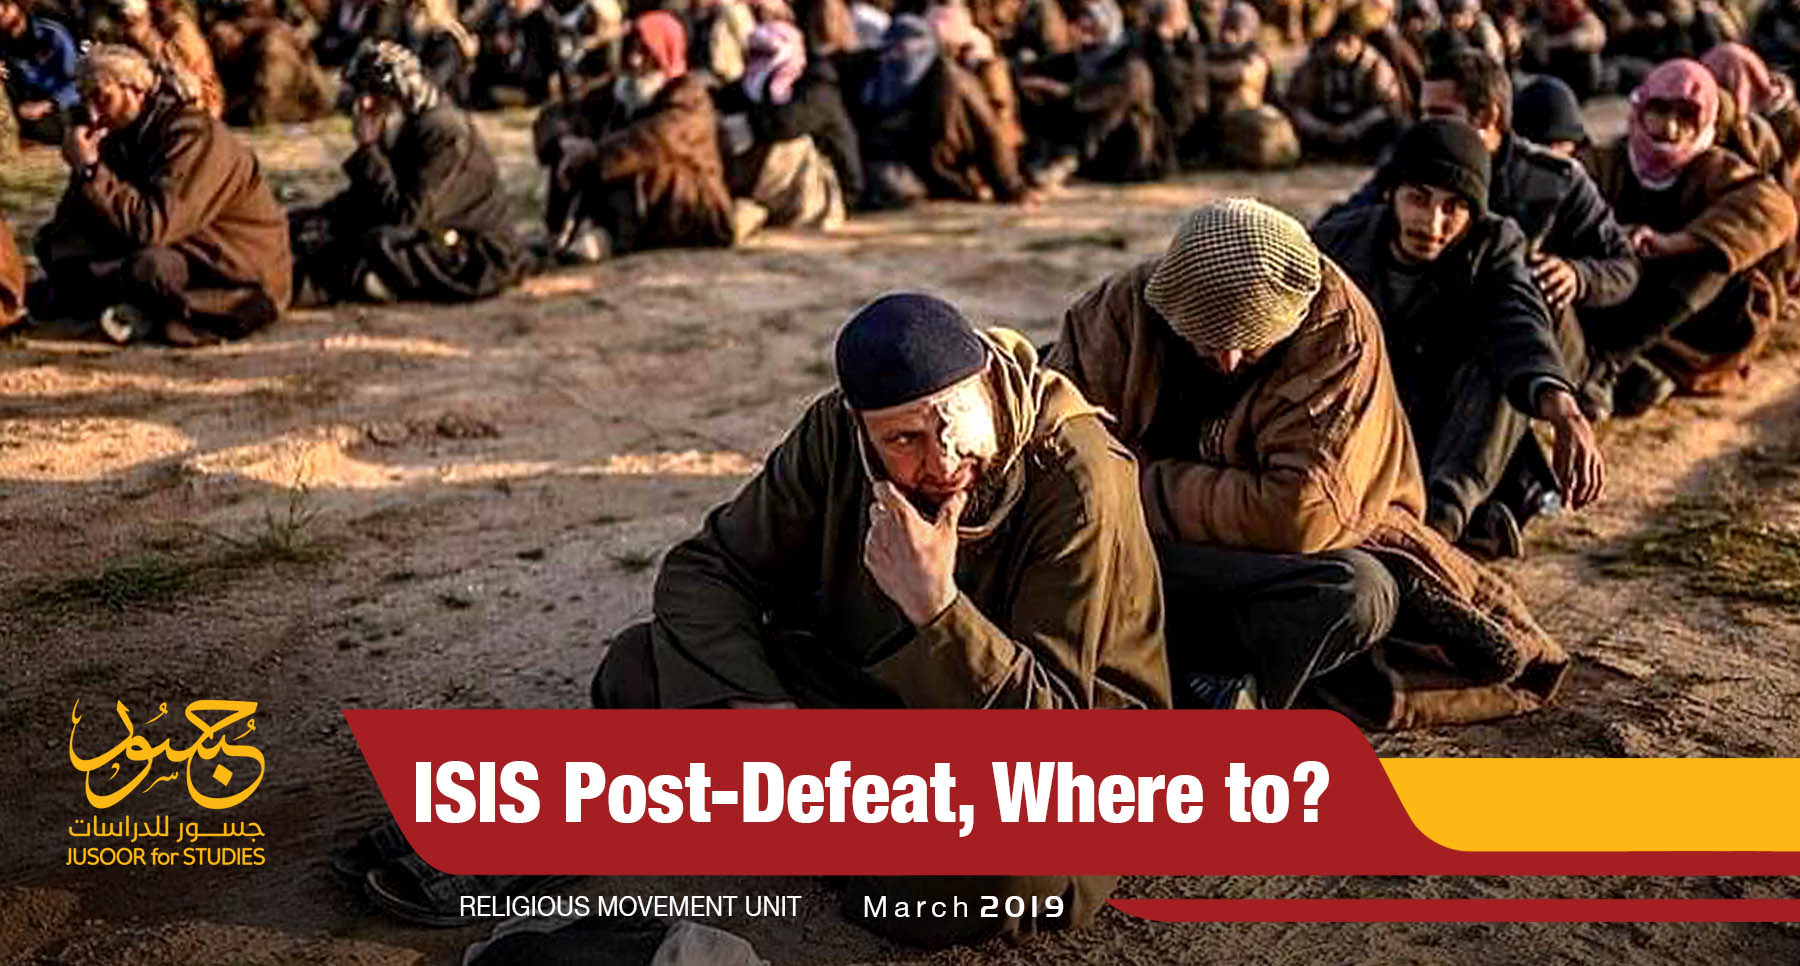 ISIS Post-Defeat, Where to?